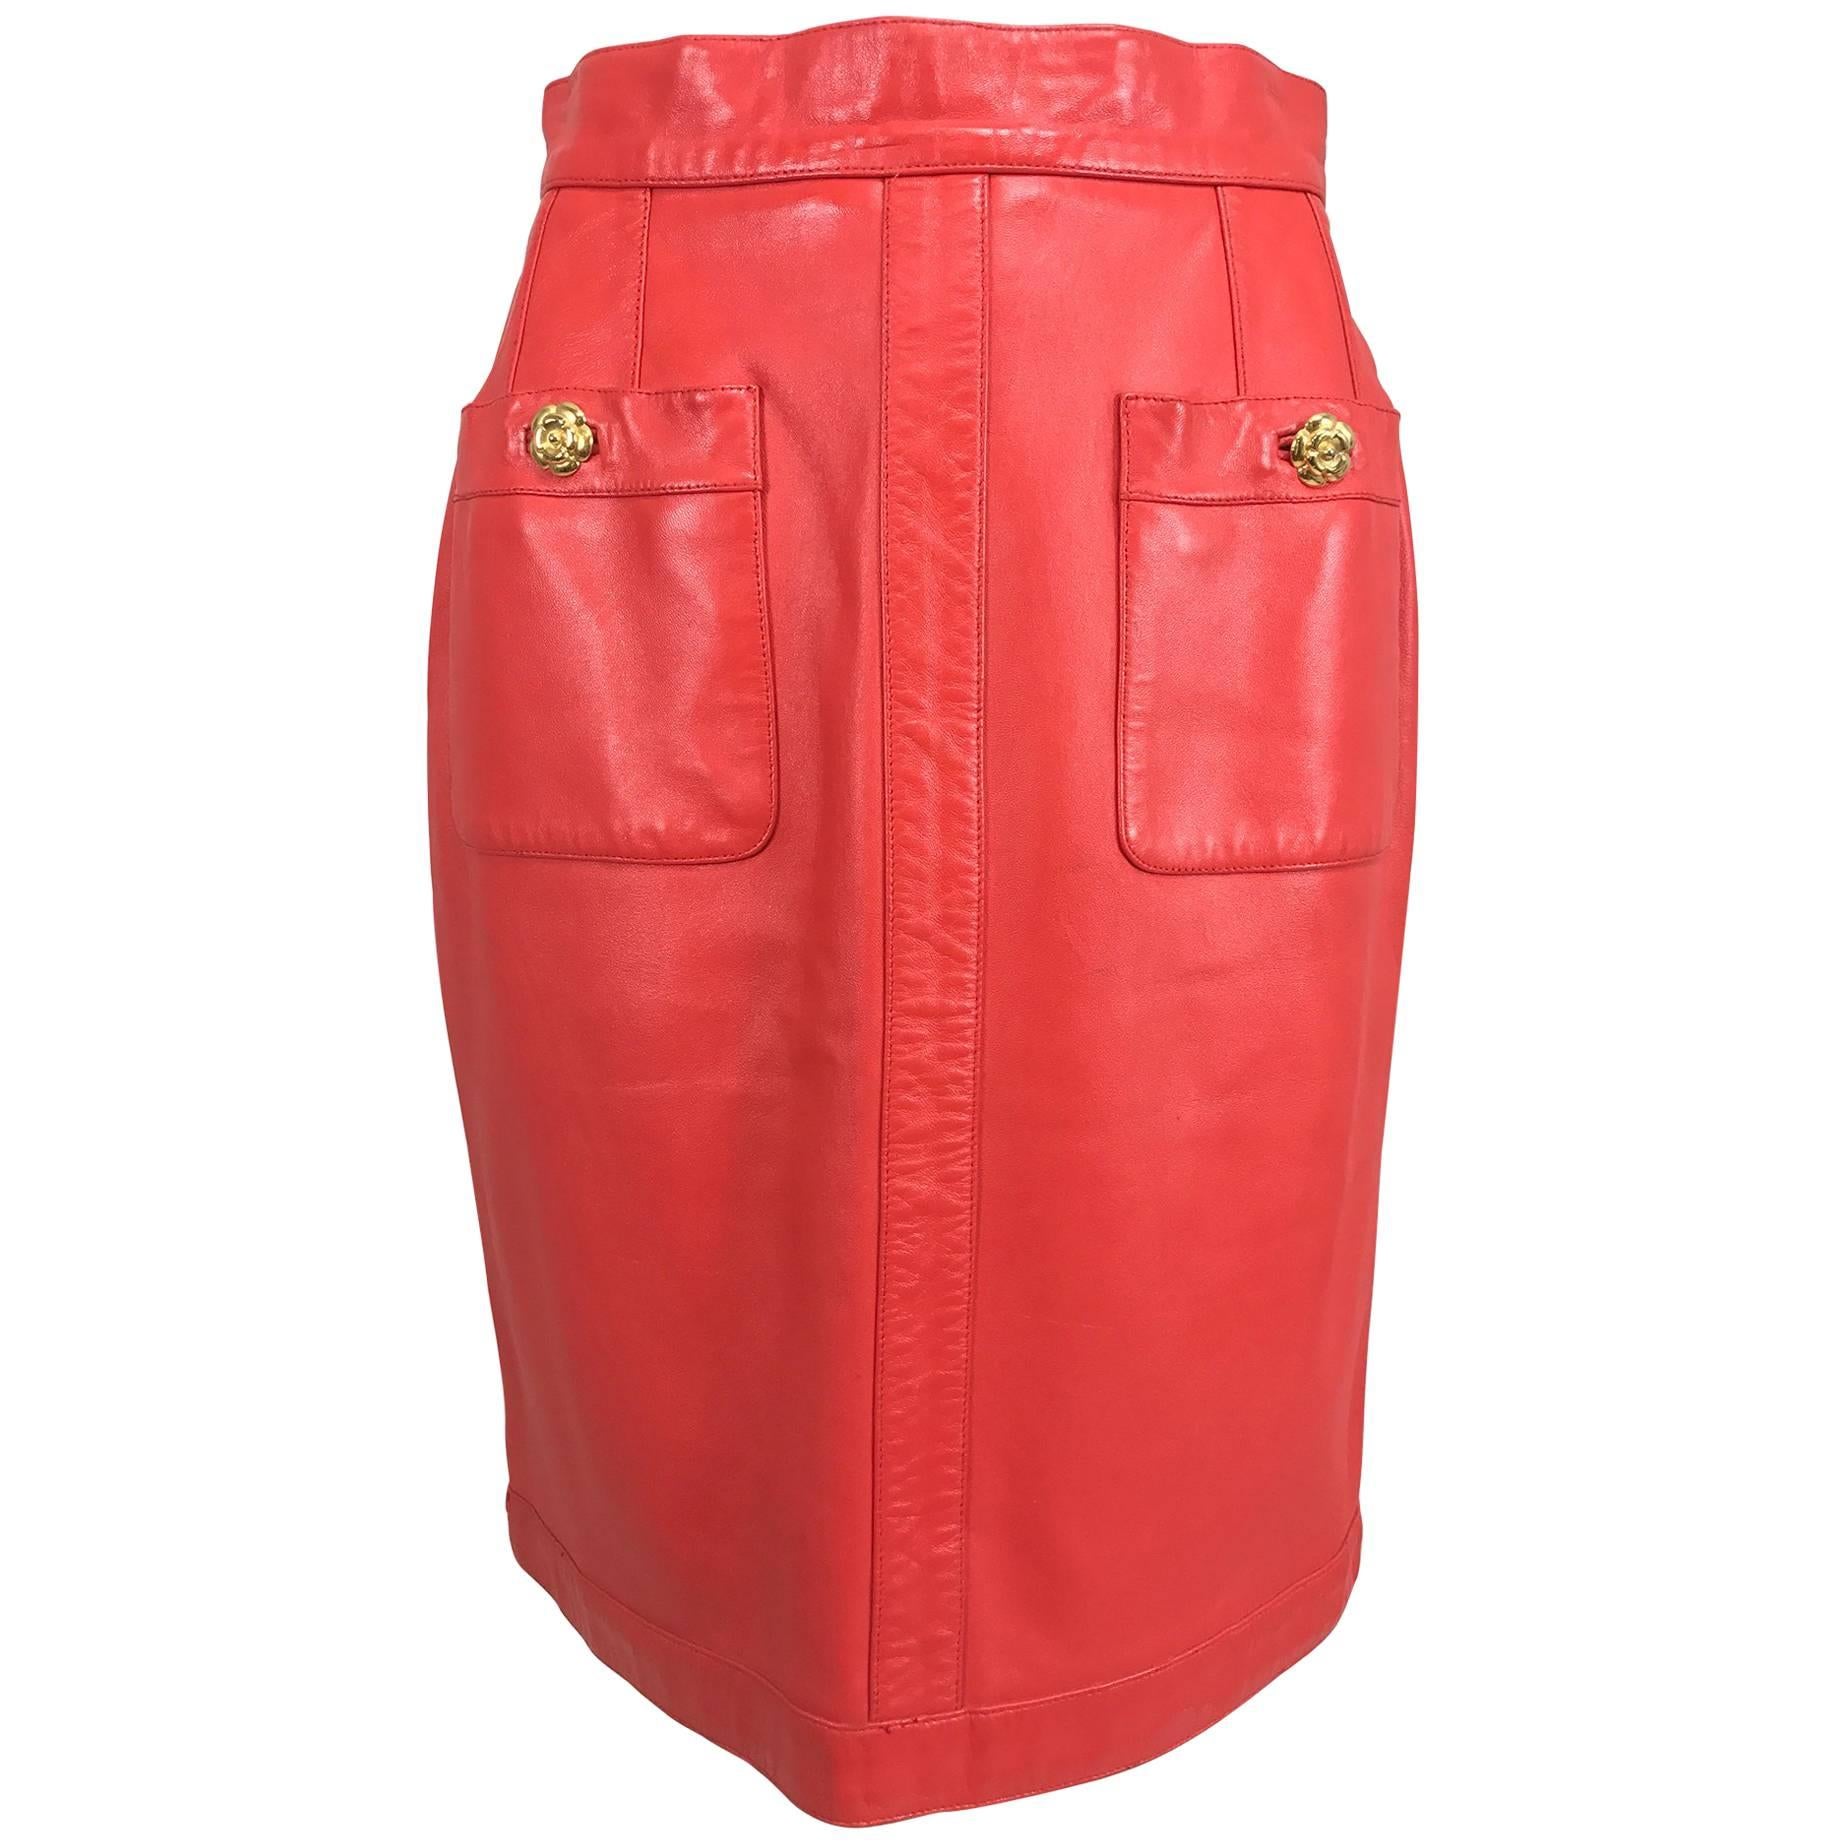 Chanel Vintage 1990s coral red leather skirt with pockets